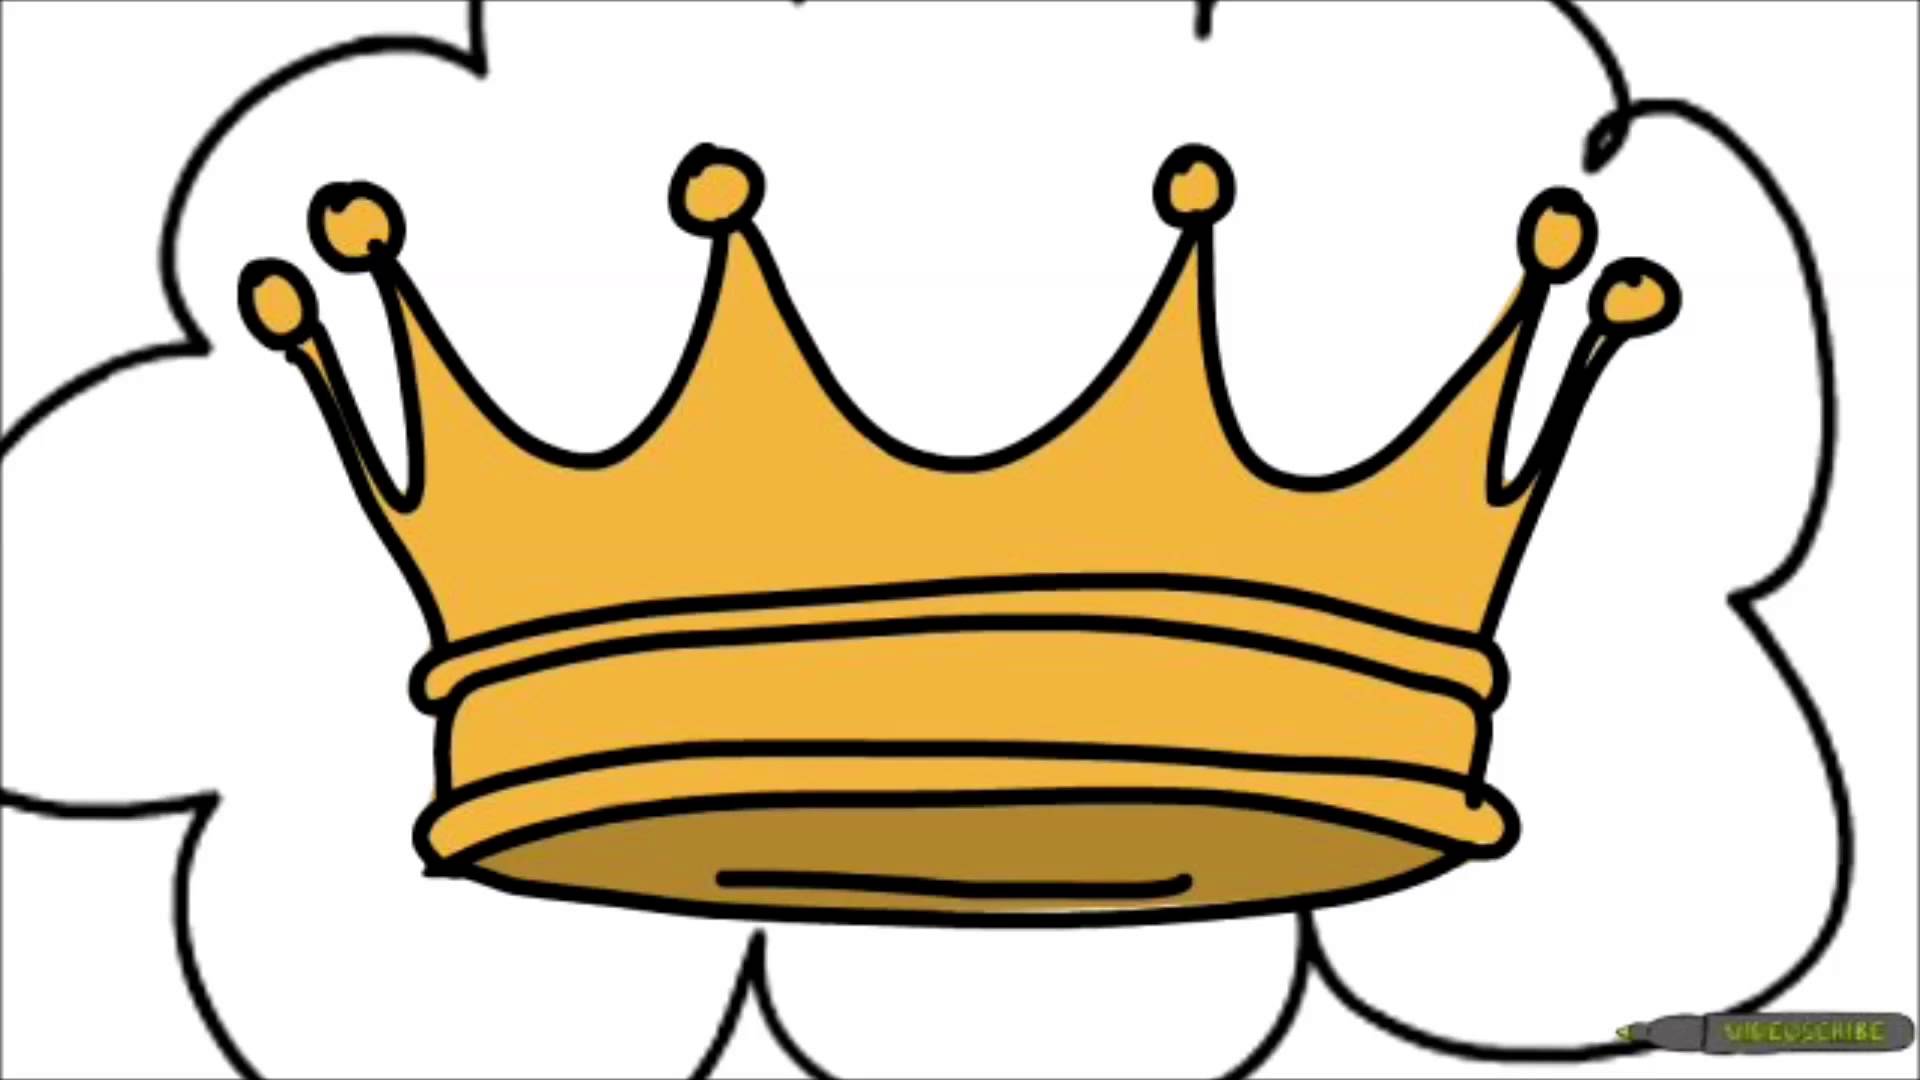 1Minute to draw it - How to draw a crown. - YouTube